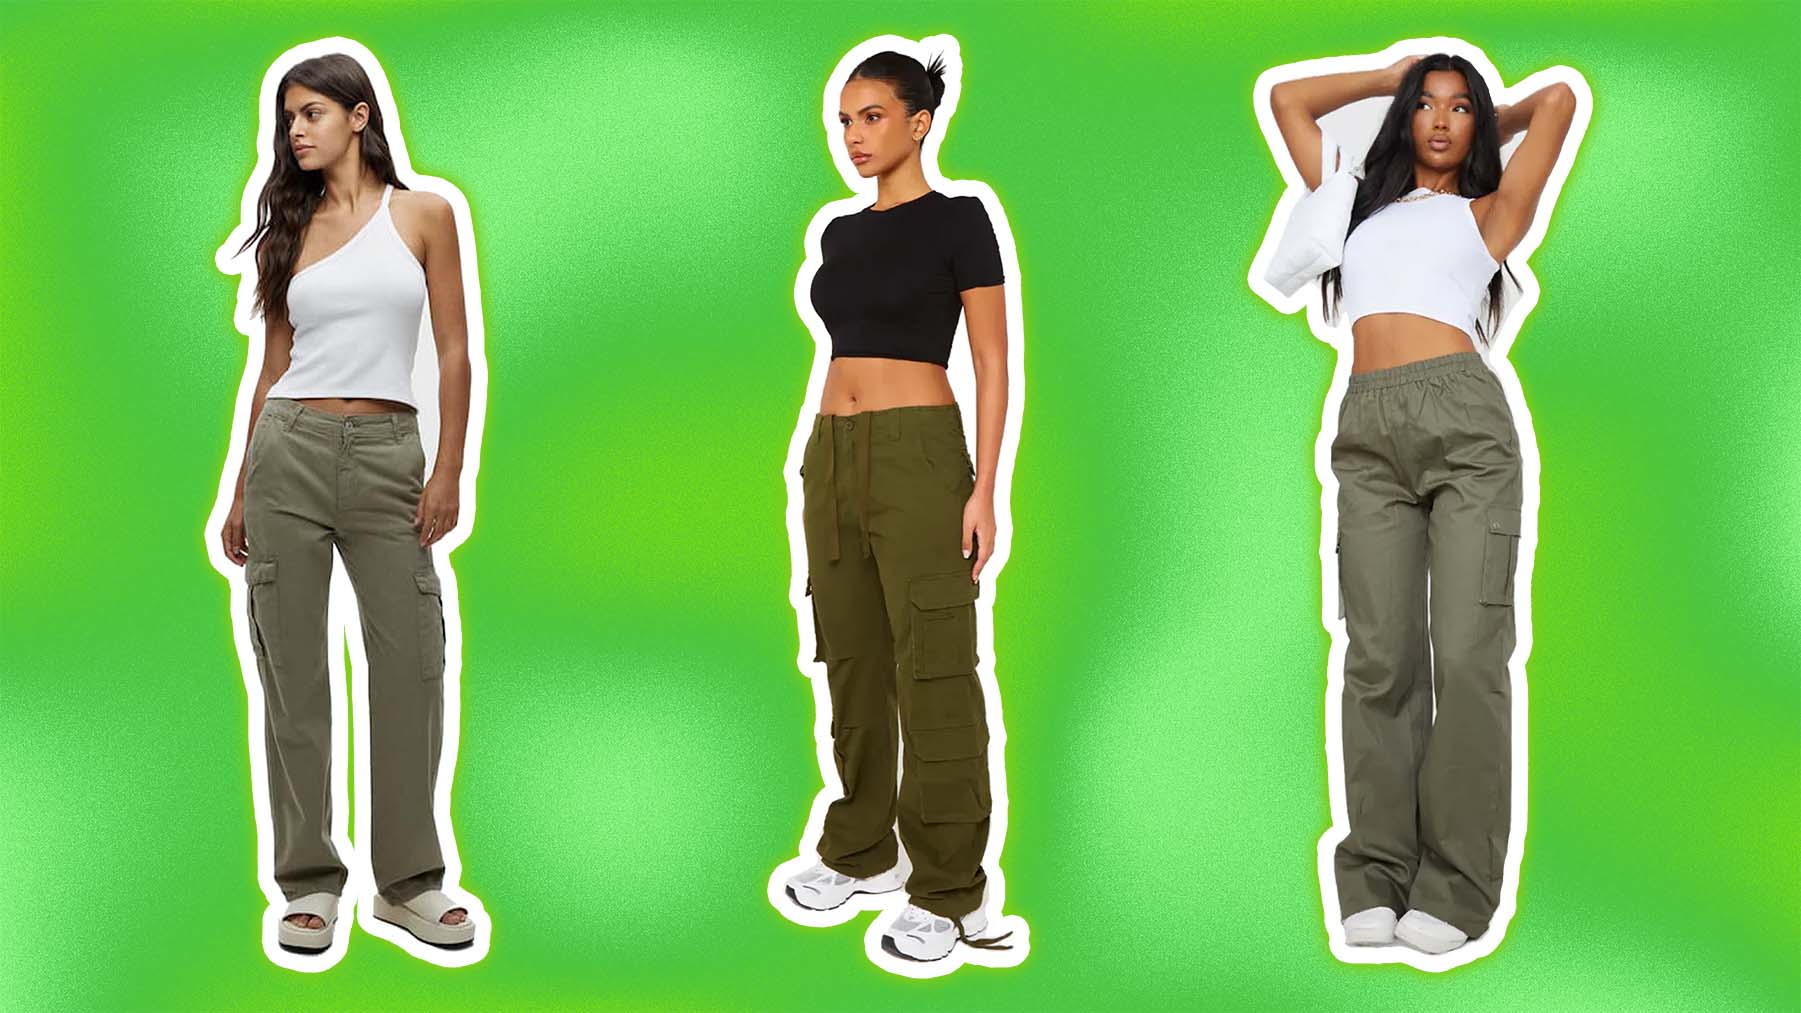 Women's High Waisted Button Side Flap Pocket Flare Casual Cargo Pants -  Halara